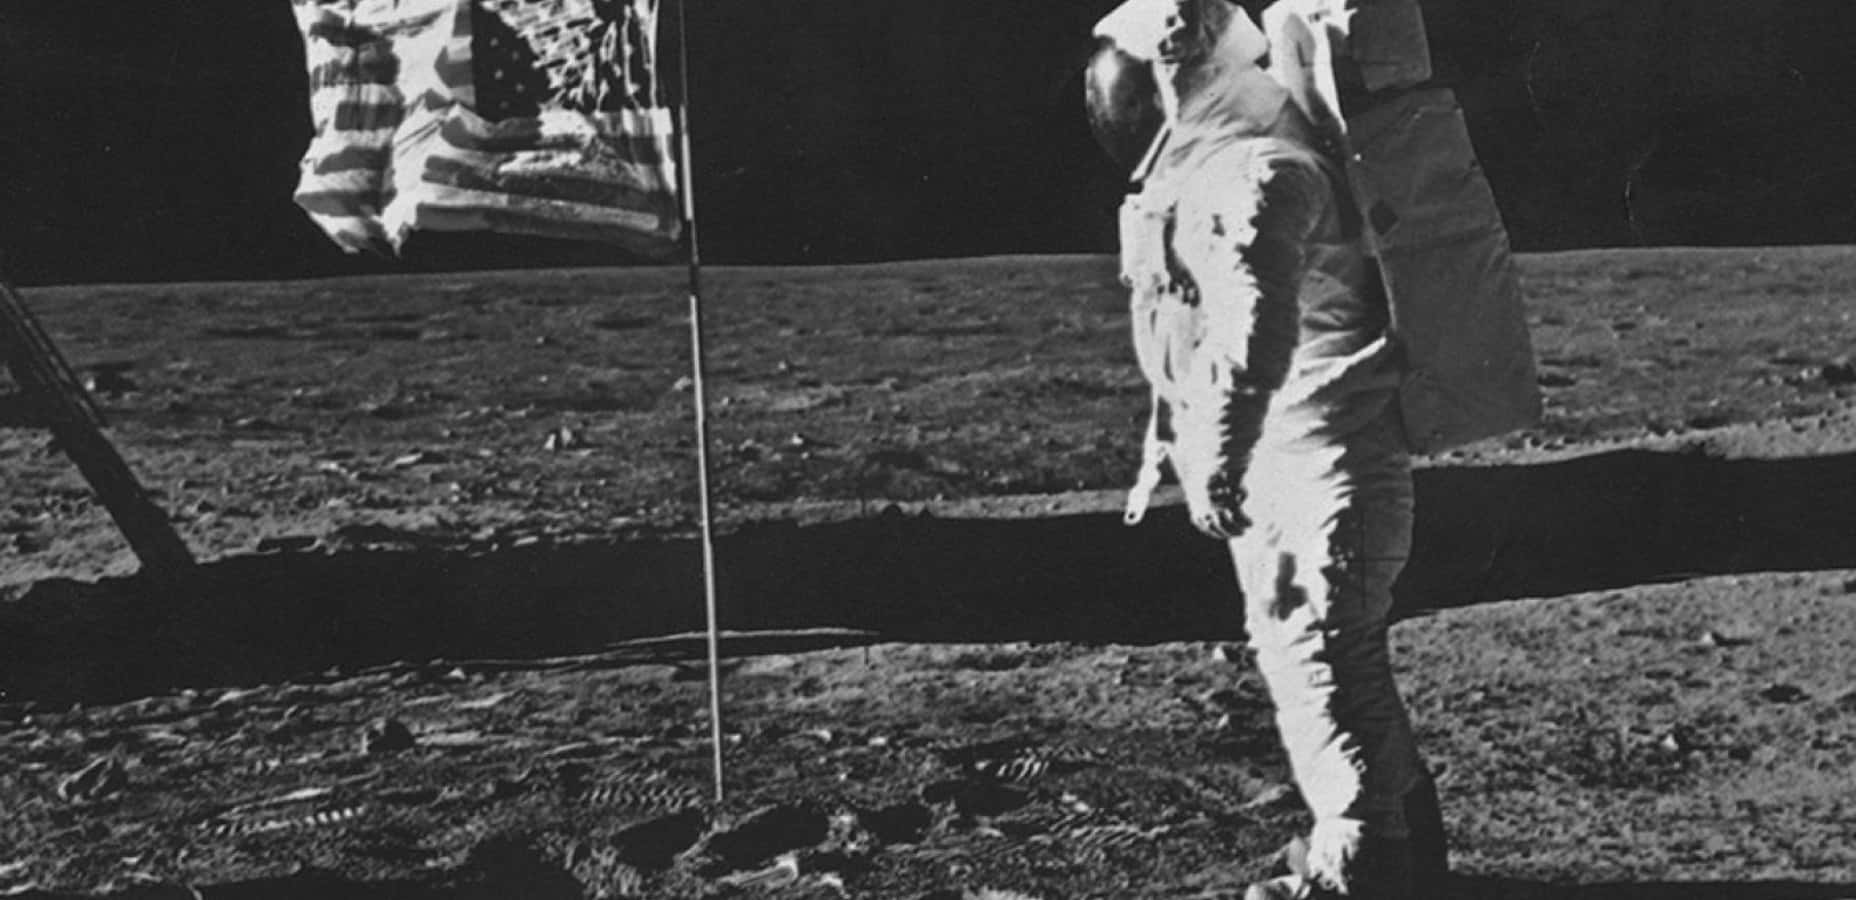 Man steps on the moon for first time